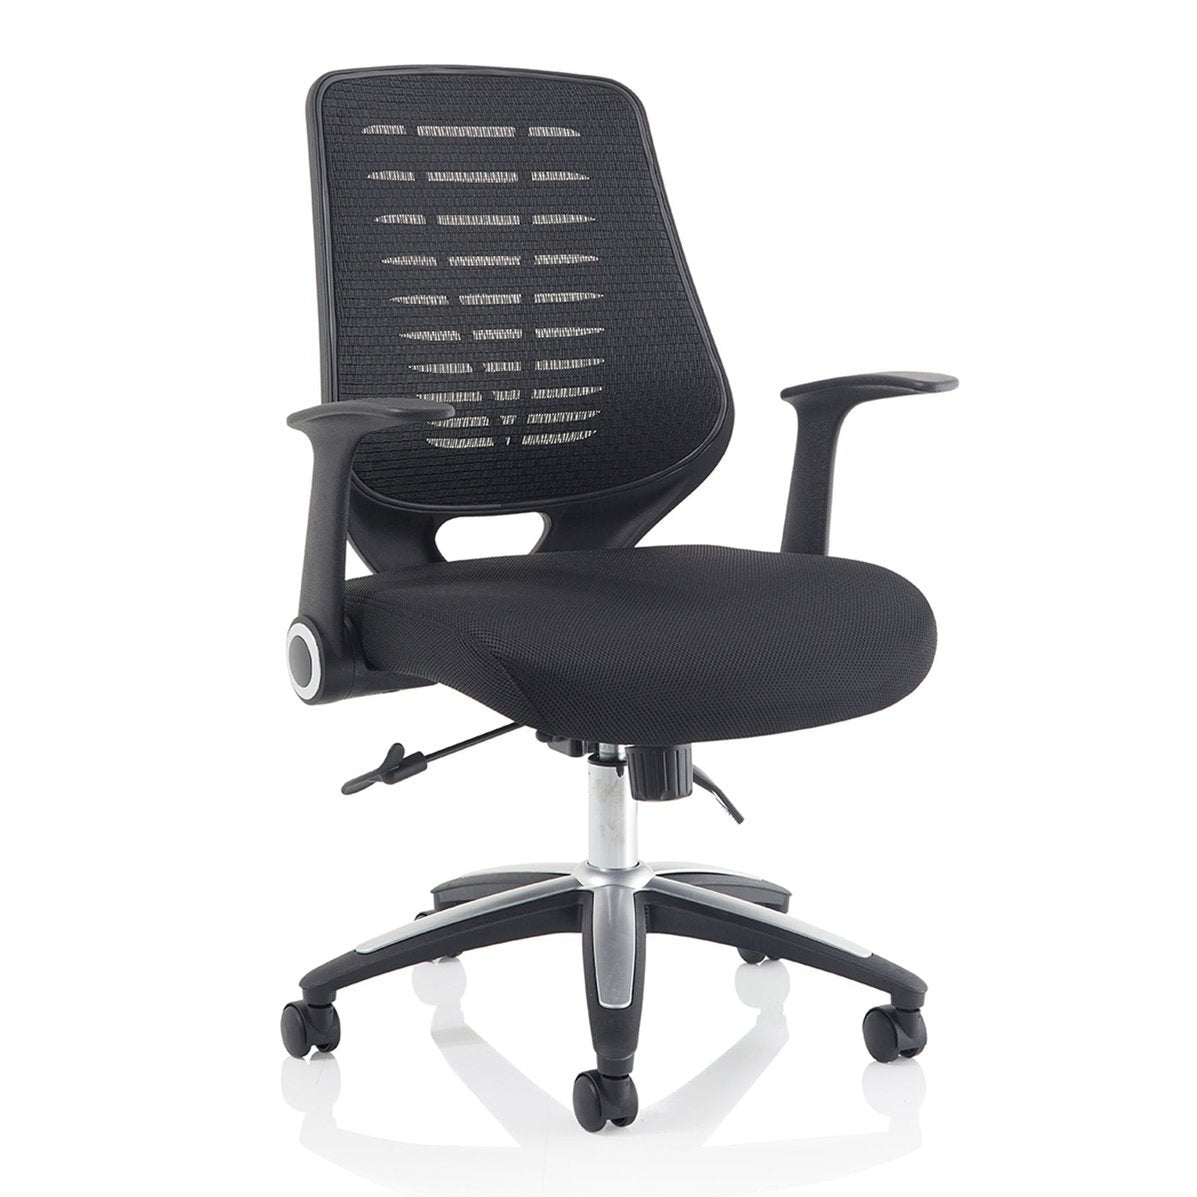 Relay Medium Mesh Back Office Chair - Task Operator Chair with Adjustable Arms, Metal & Plastic Frame, 110kg Capacity, 8hr Usage - Flat Packed